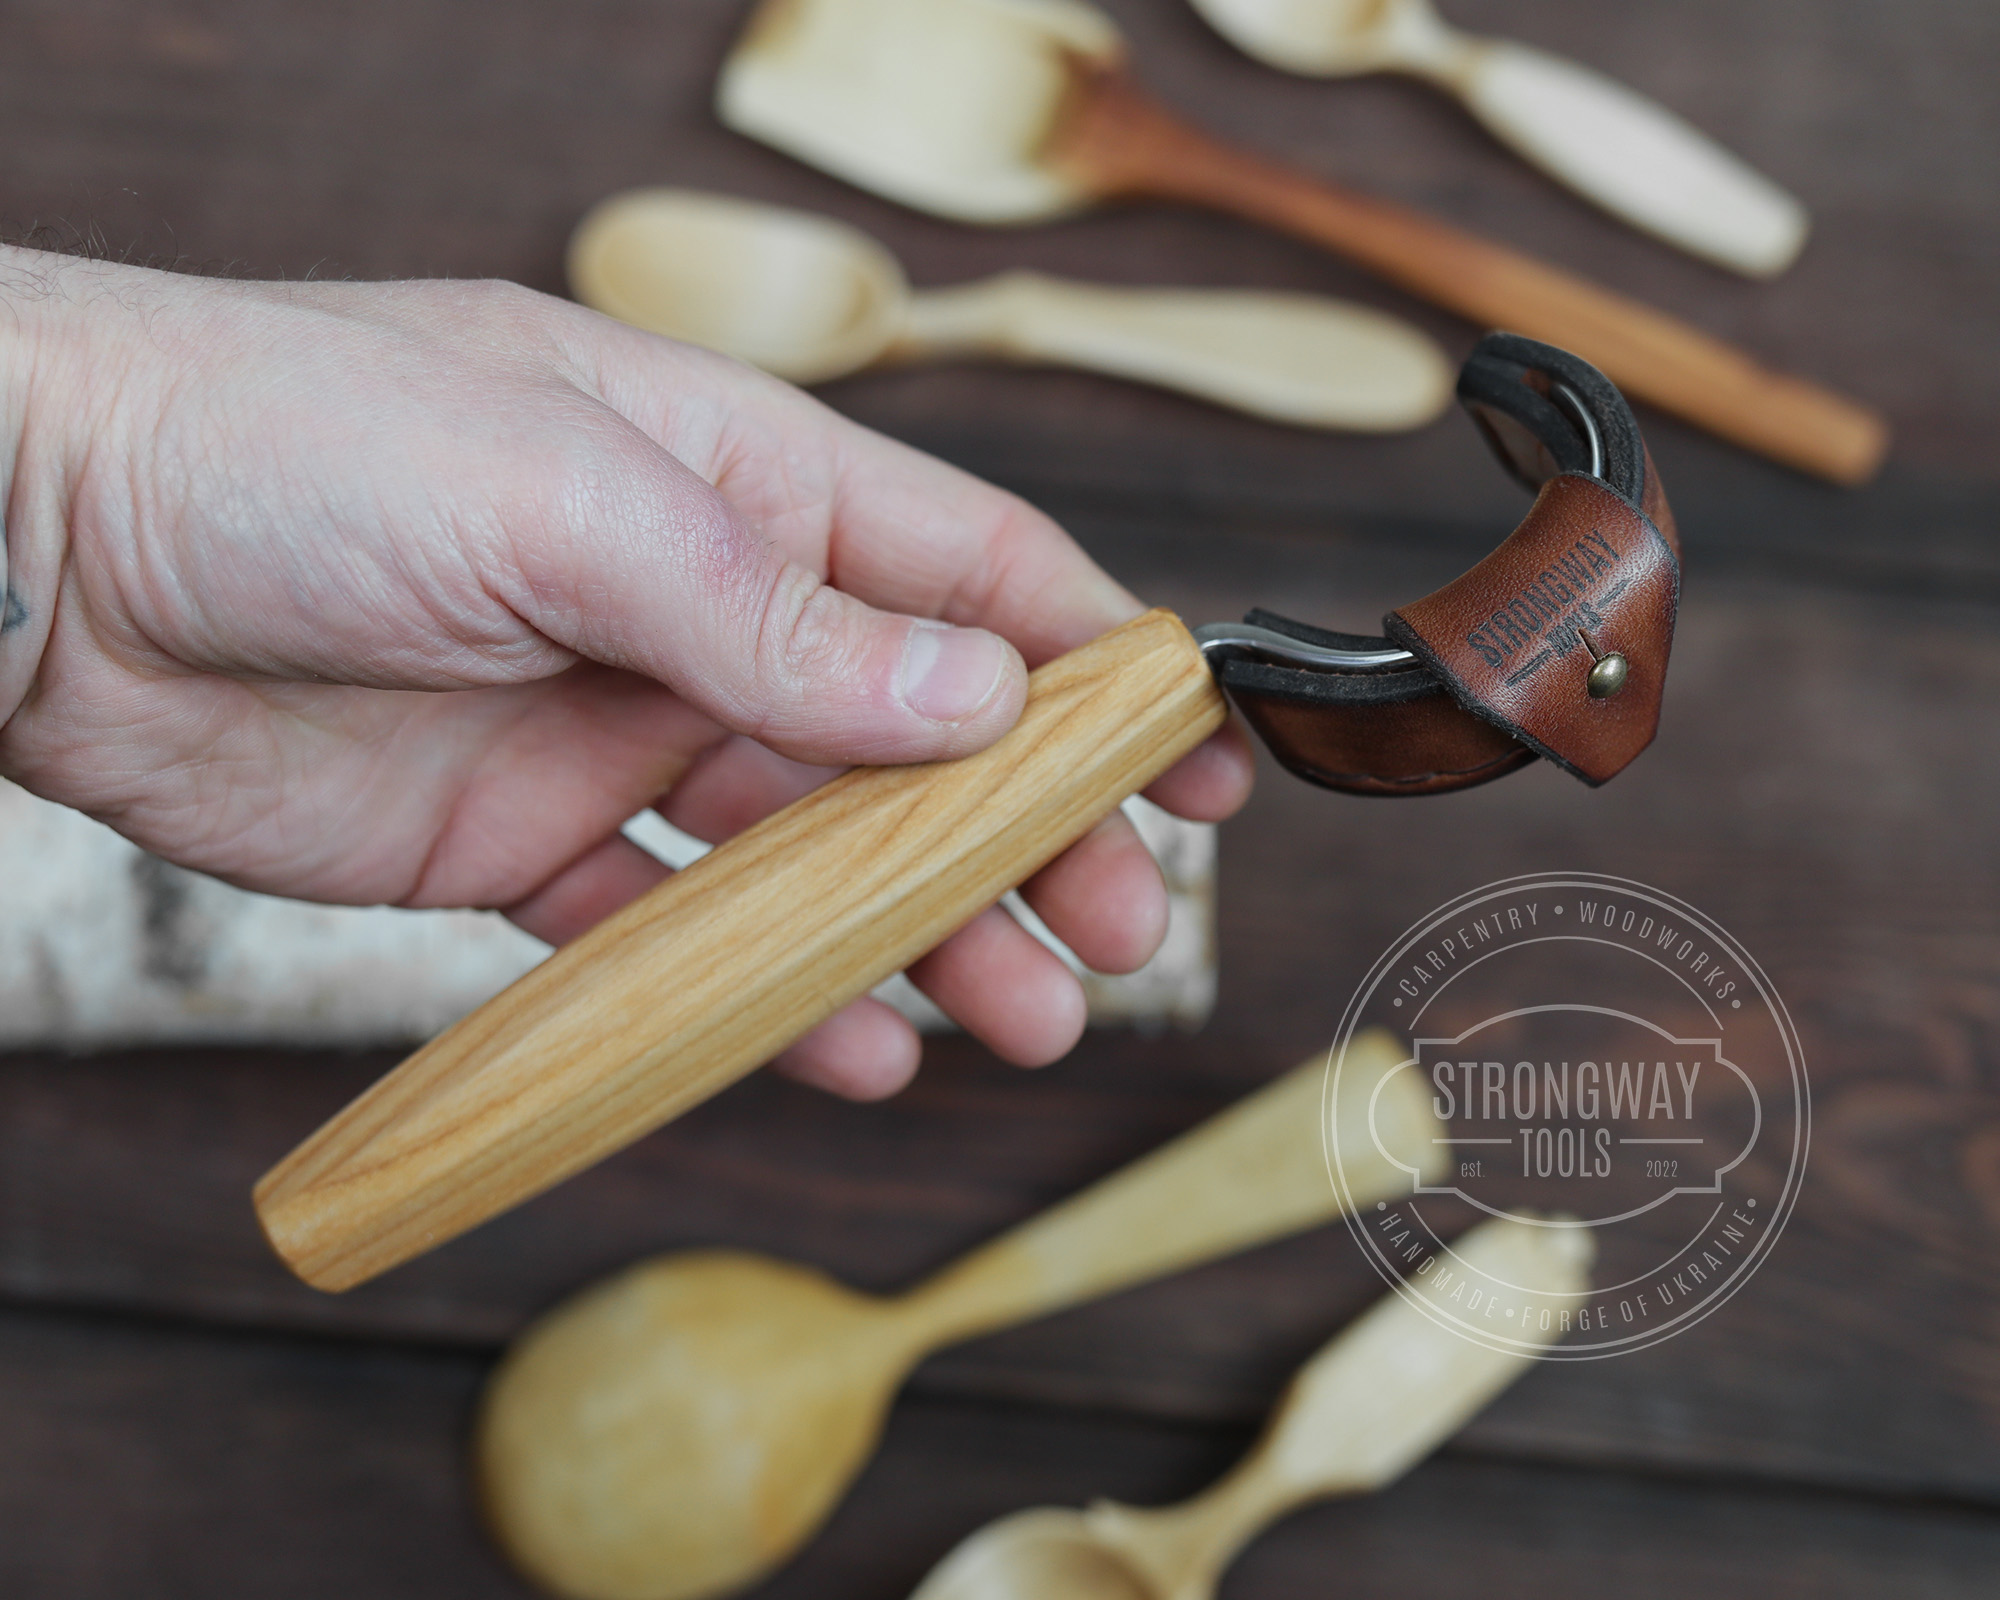 Spoon Carving Kit